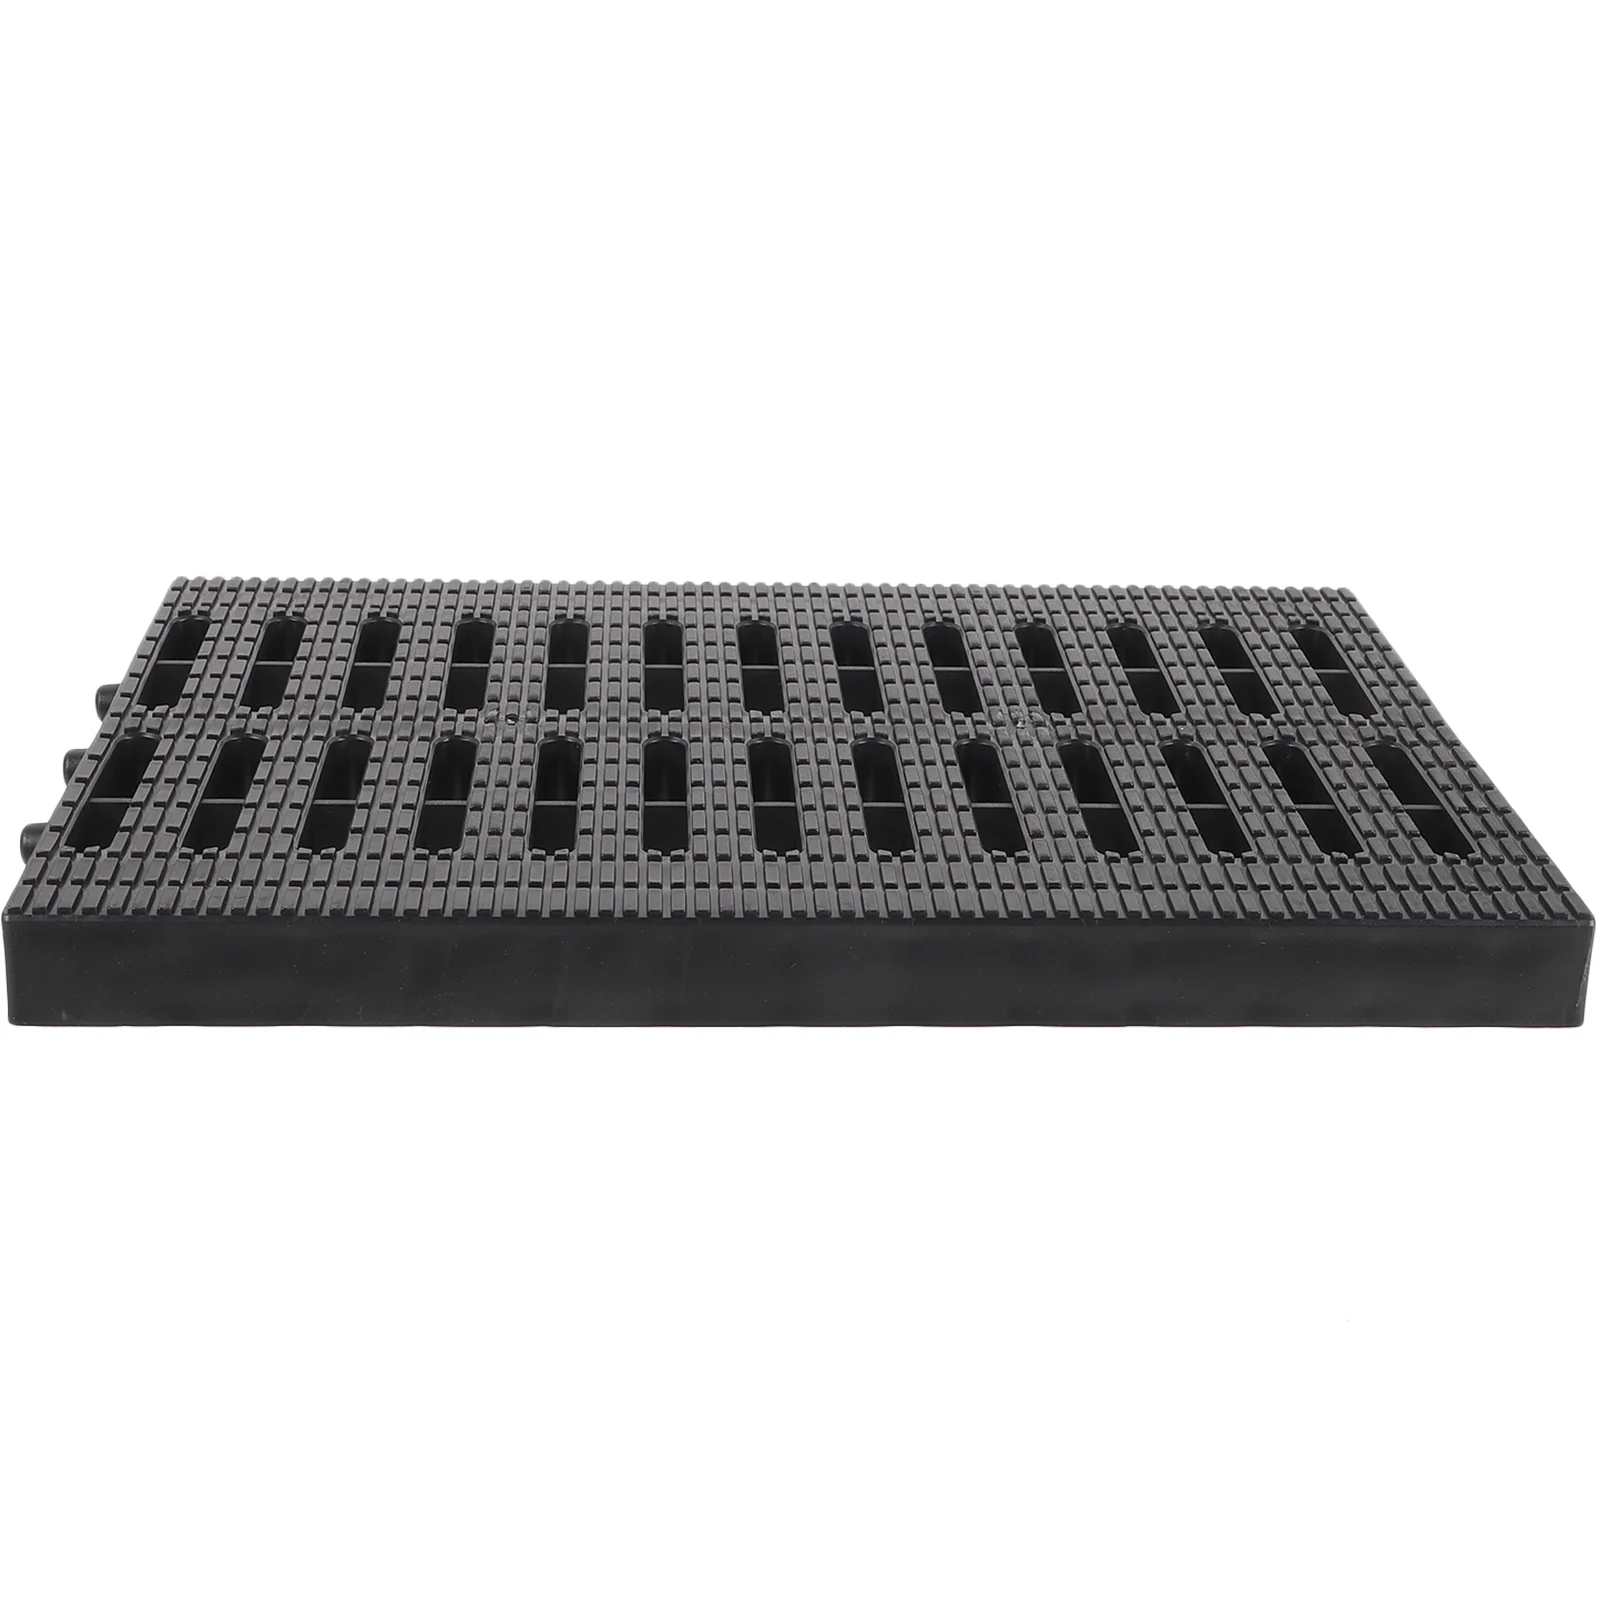 

Trench Cover Basement Drain Accessory Kitchen Sewer Grate Drainage Grates Garage Floor Plastic Outdoor